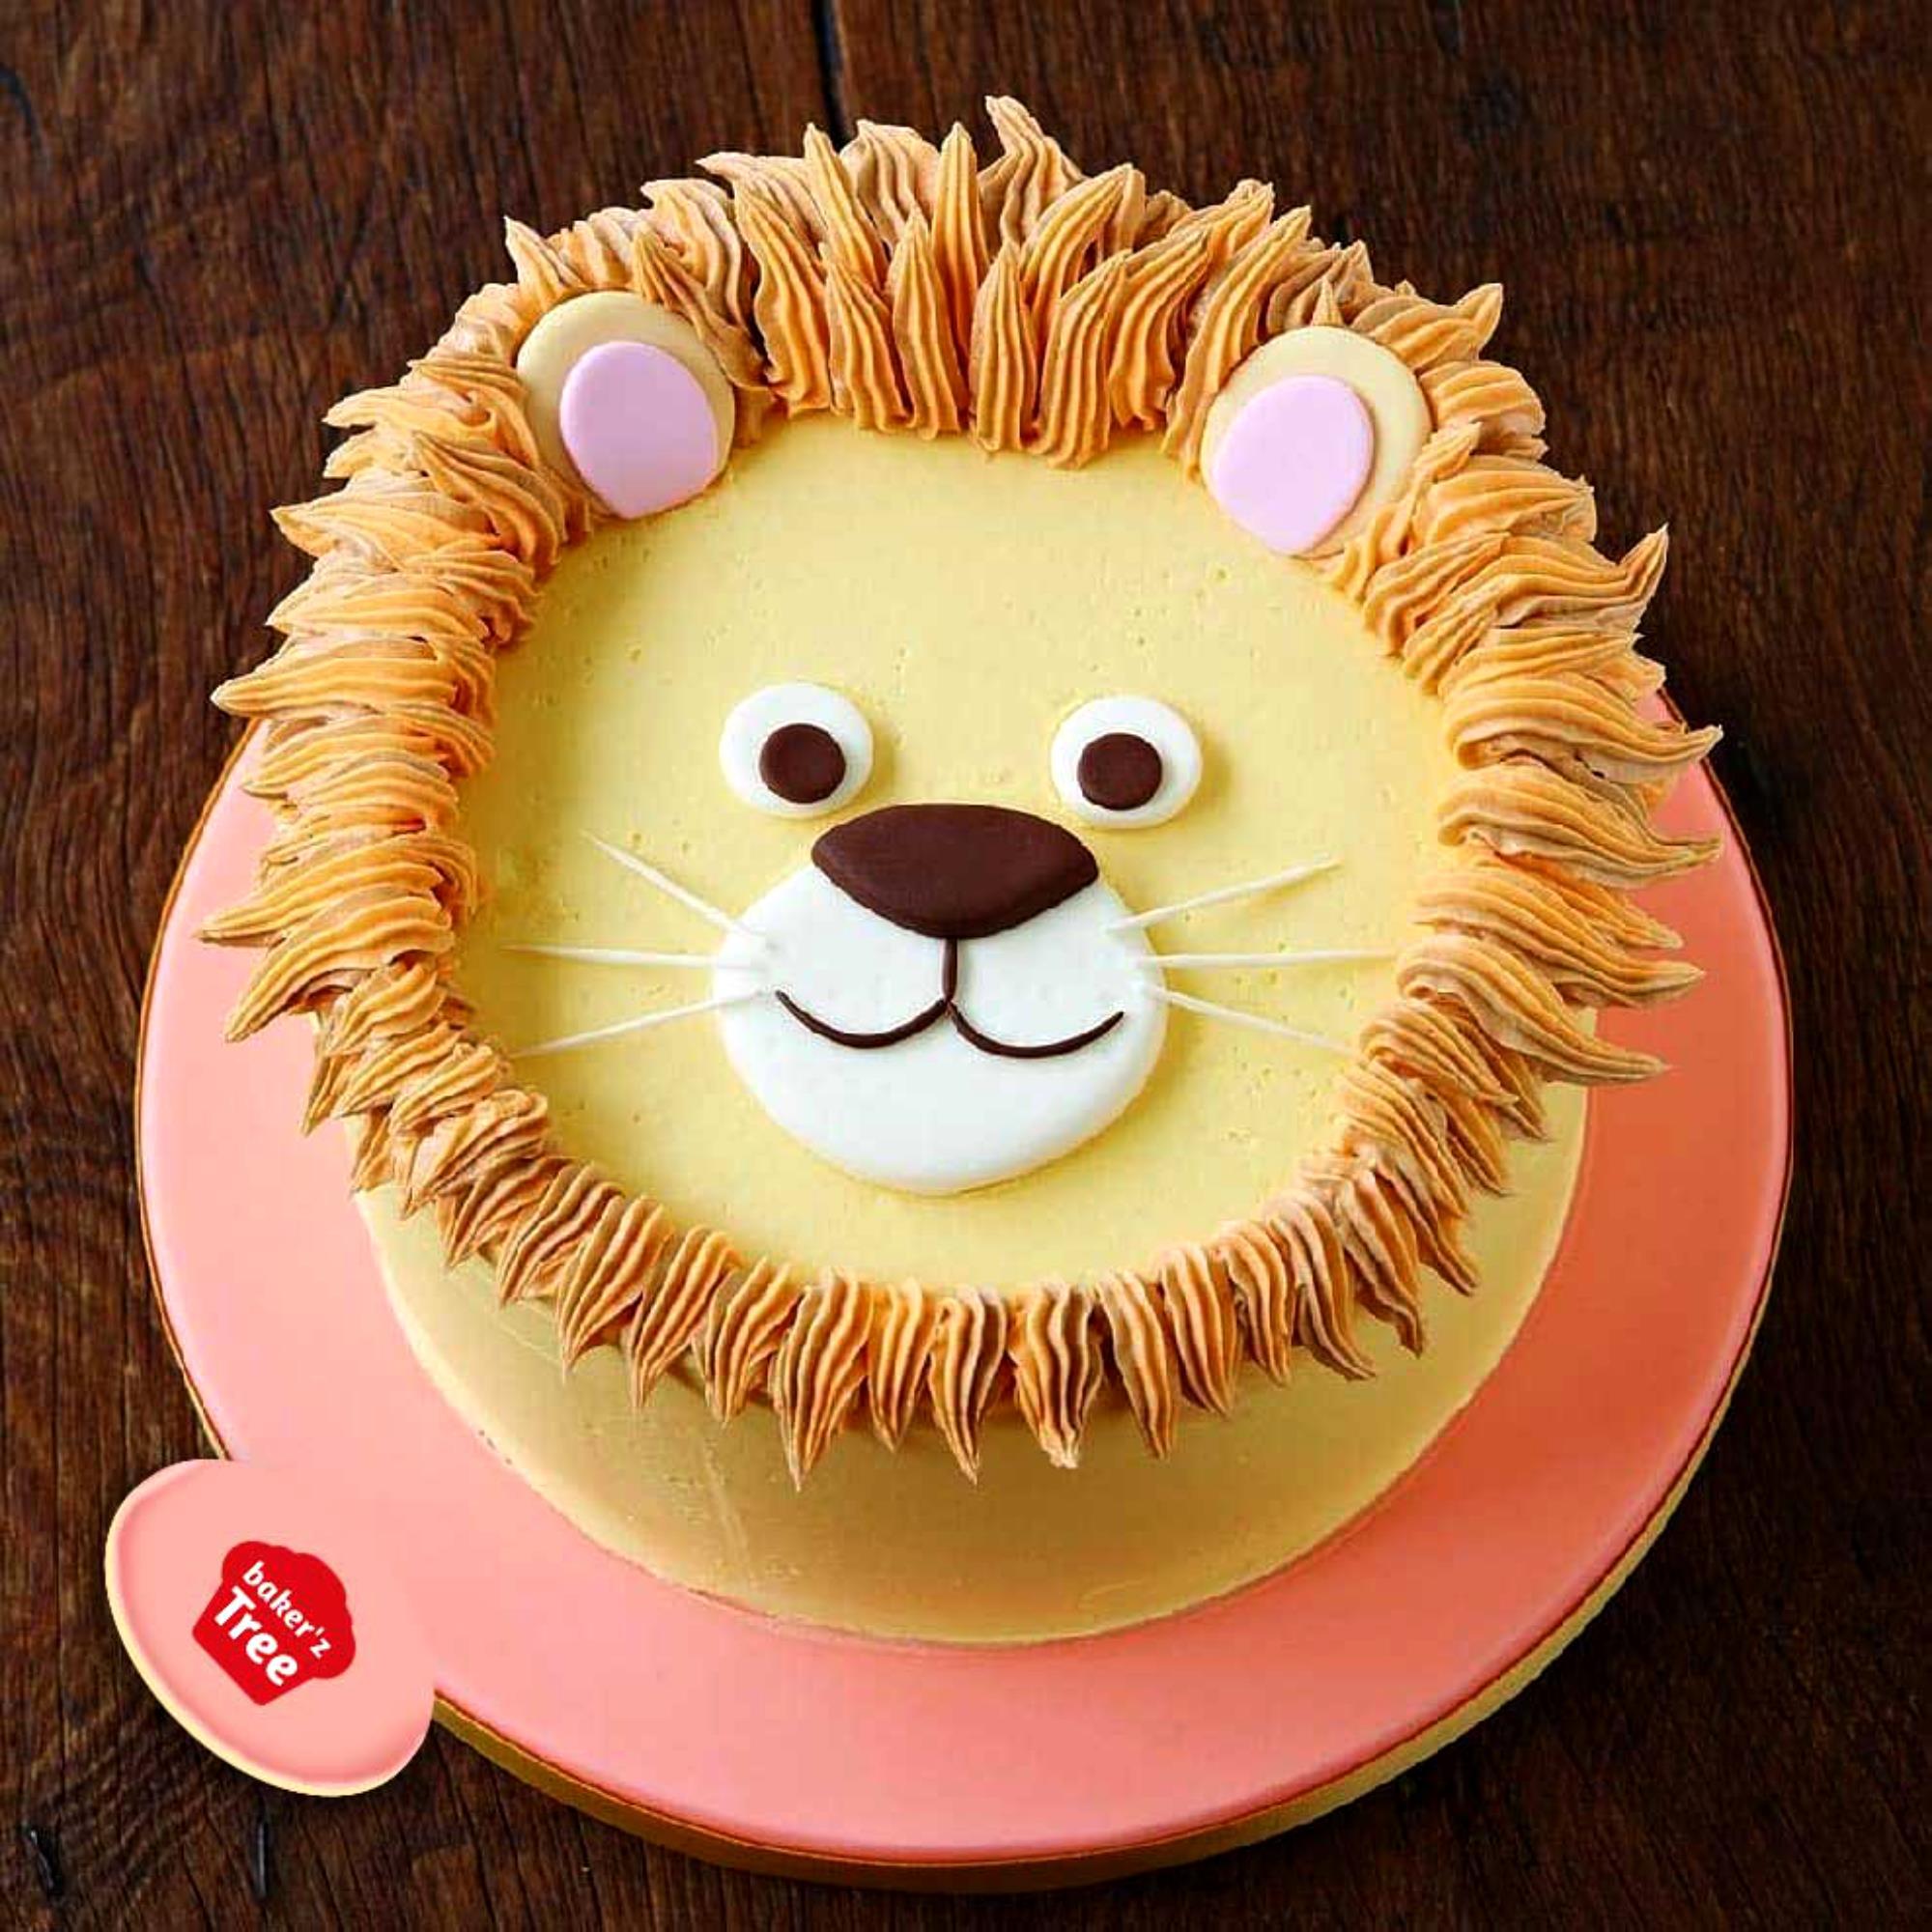 Lion King - Classic Foods Bakery